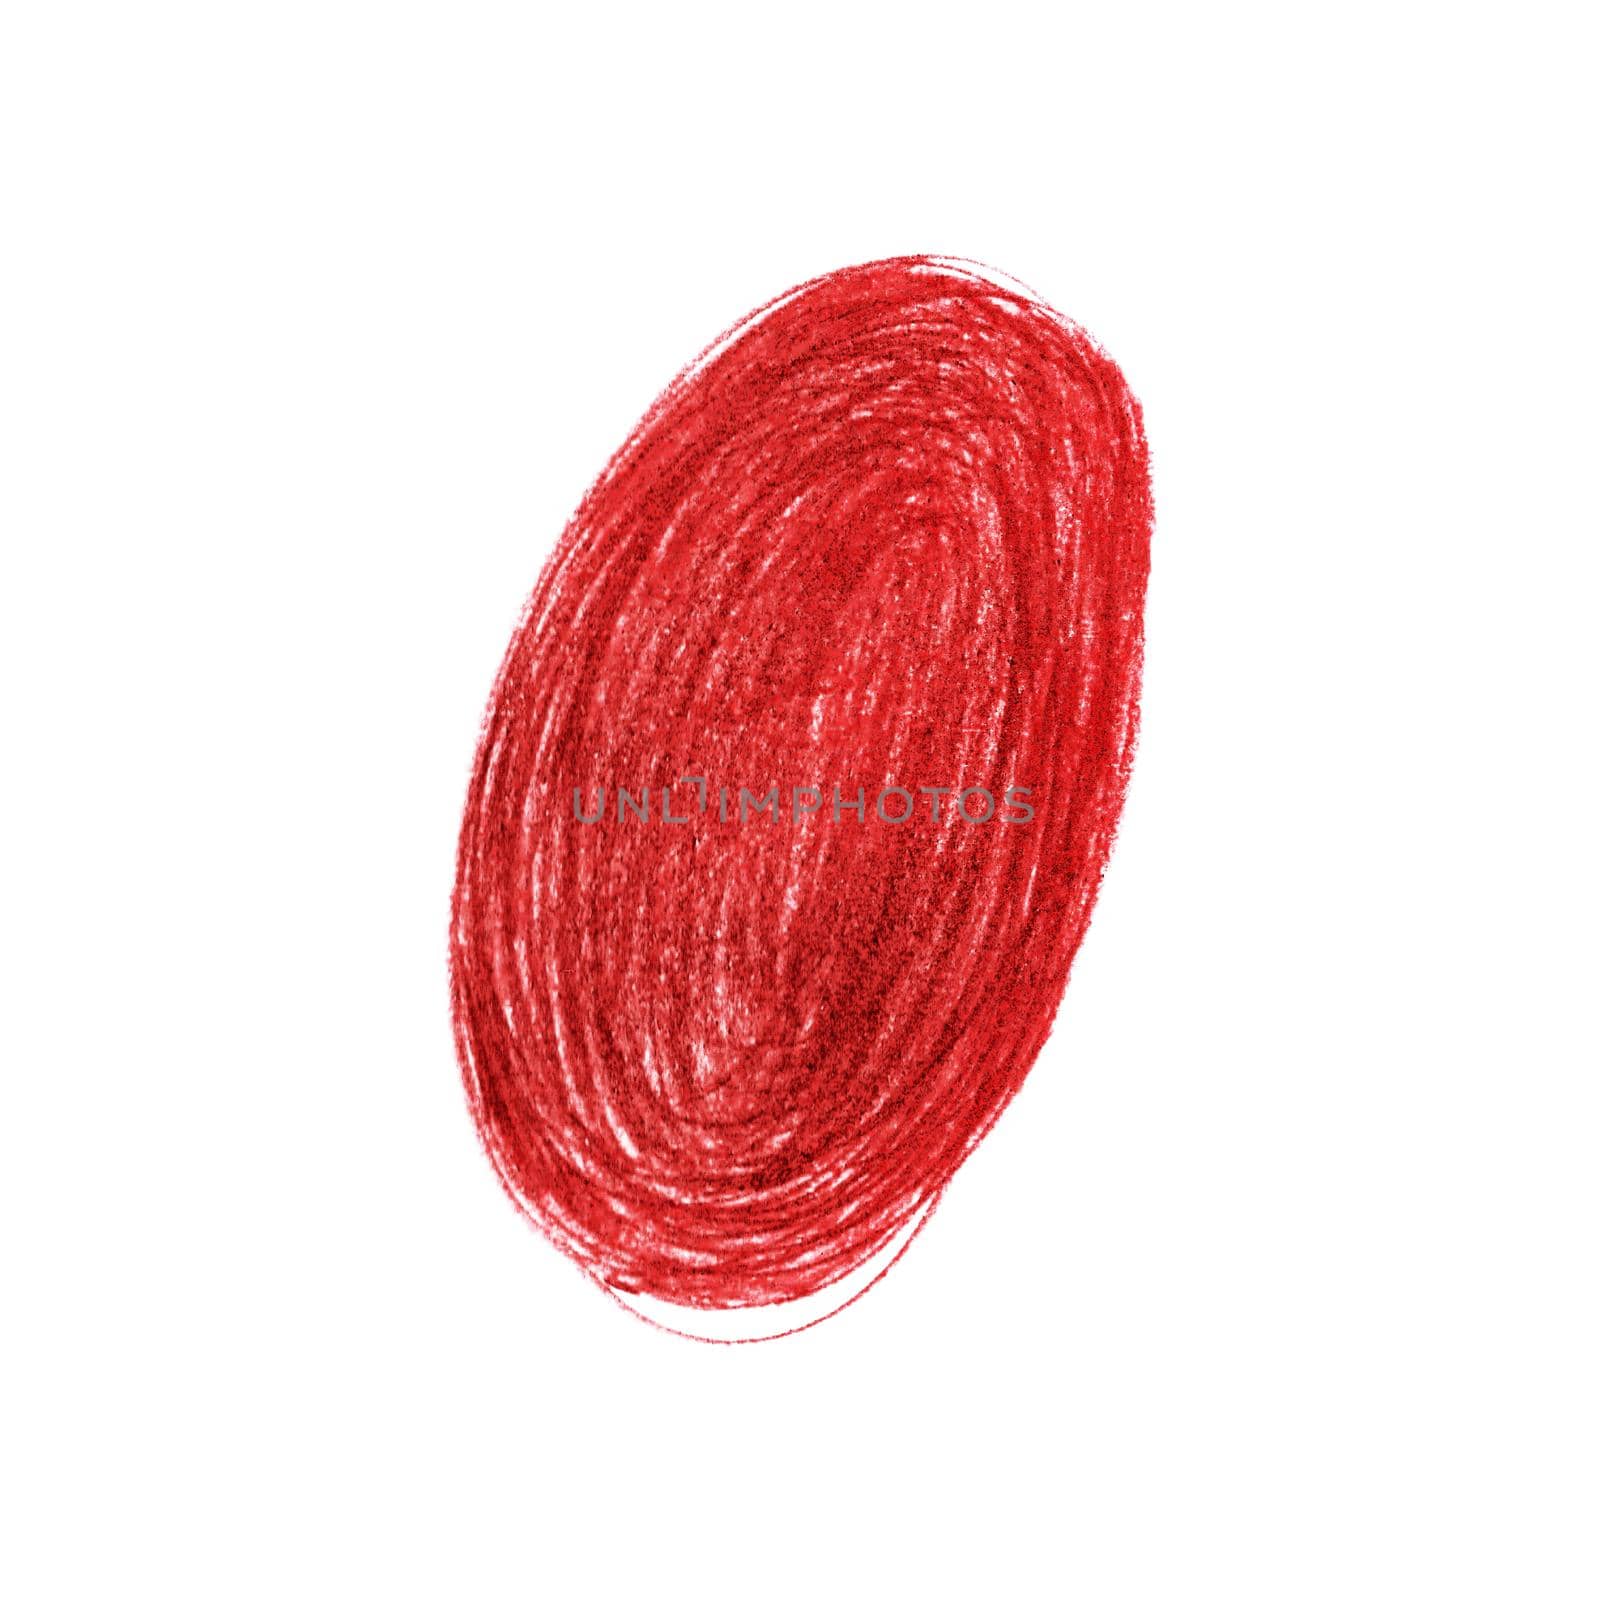 Hand Drawn Abstract Color Pencil Scribble Abstract Illustration Isolated on White Background.